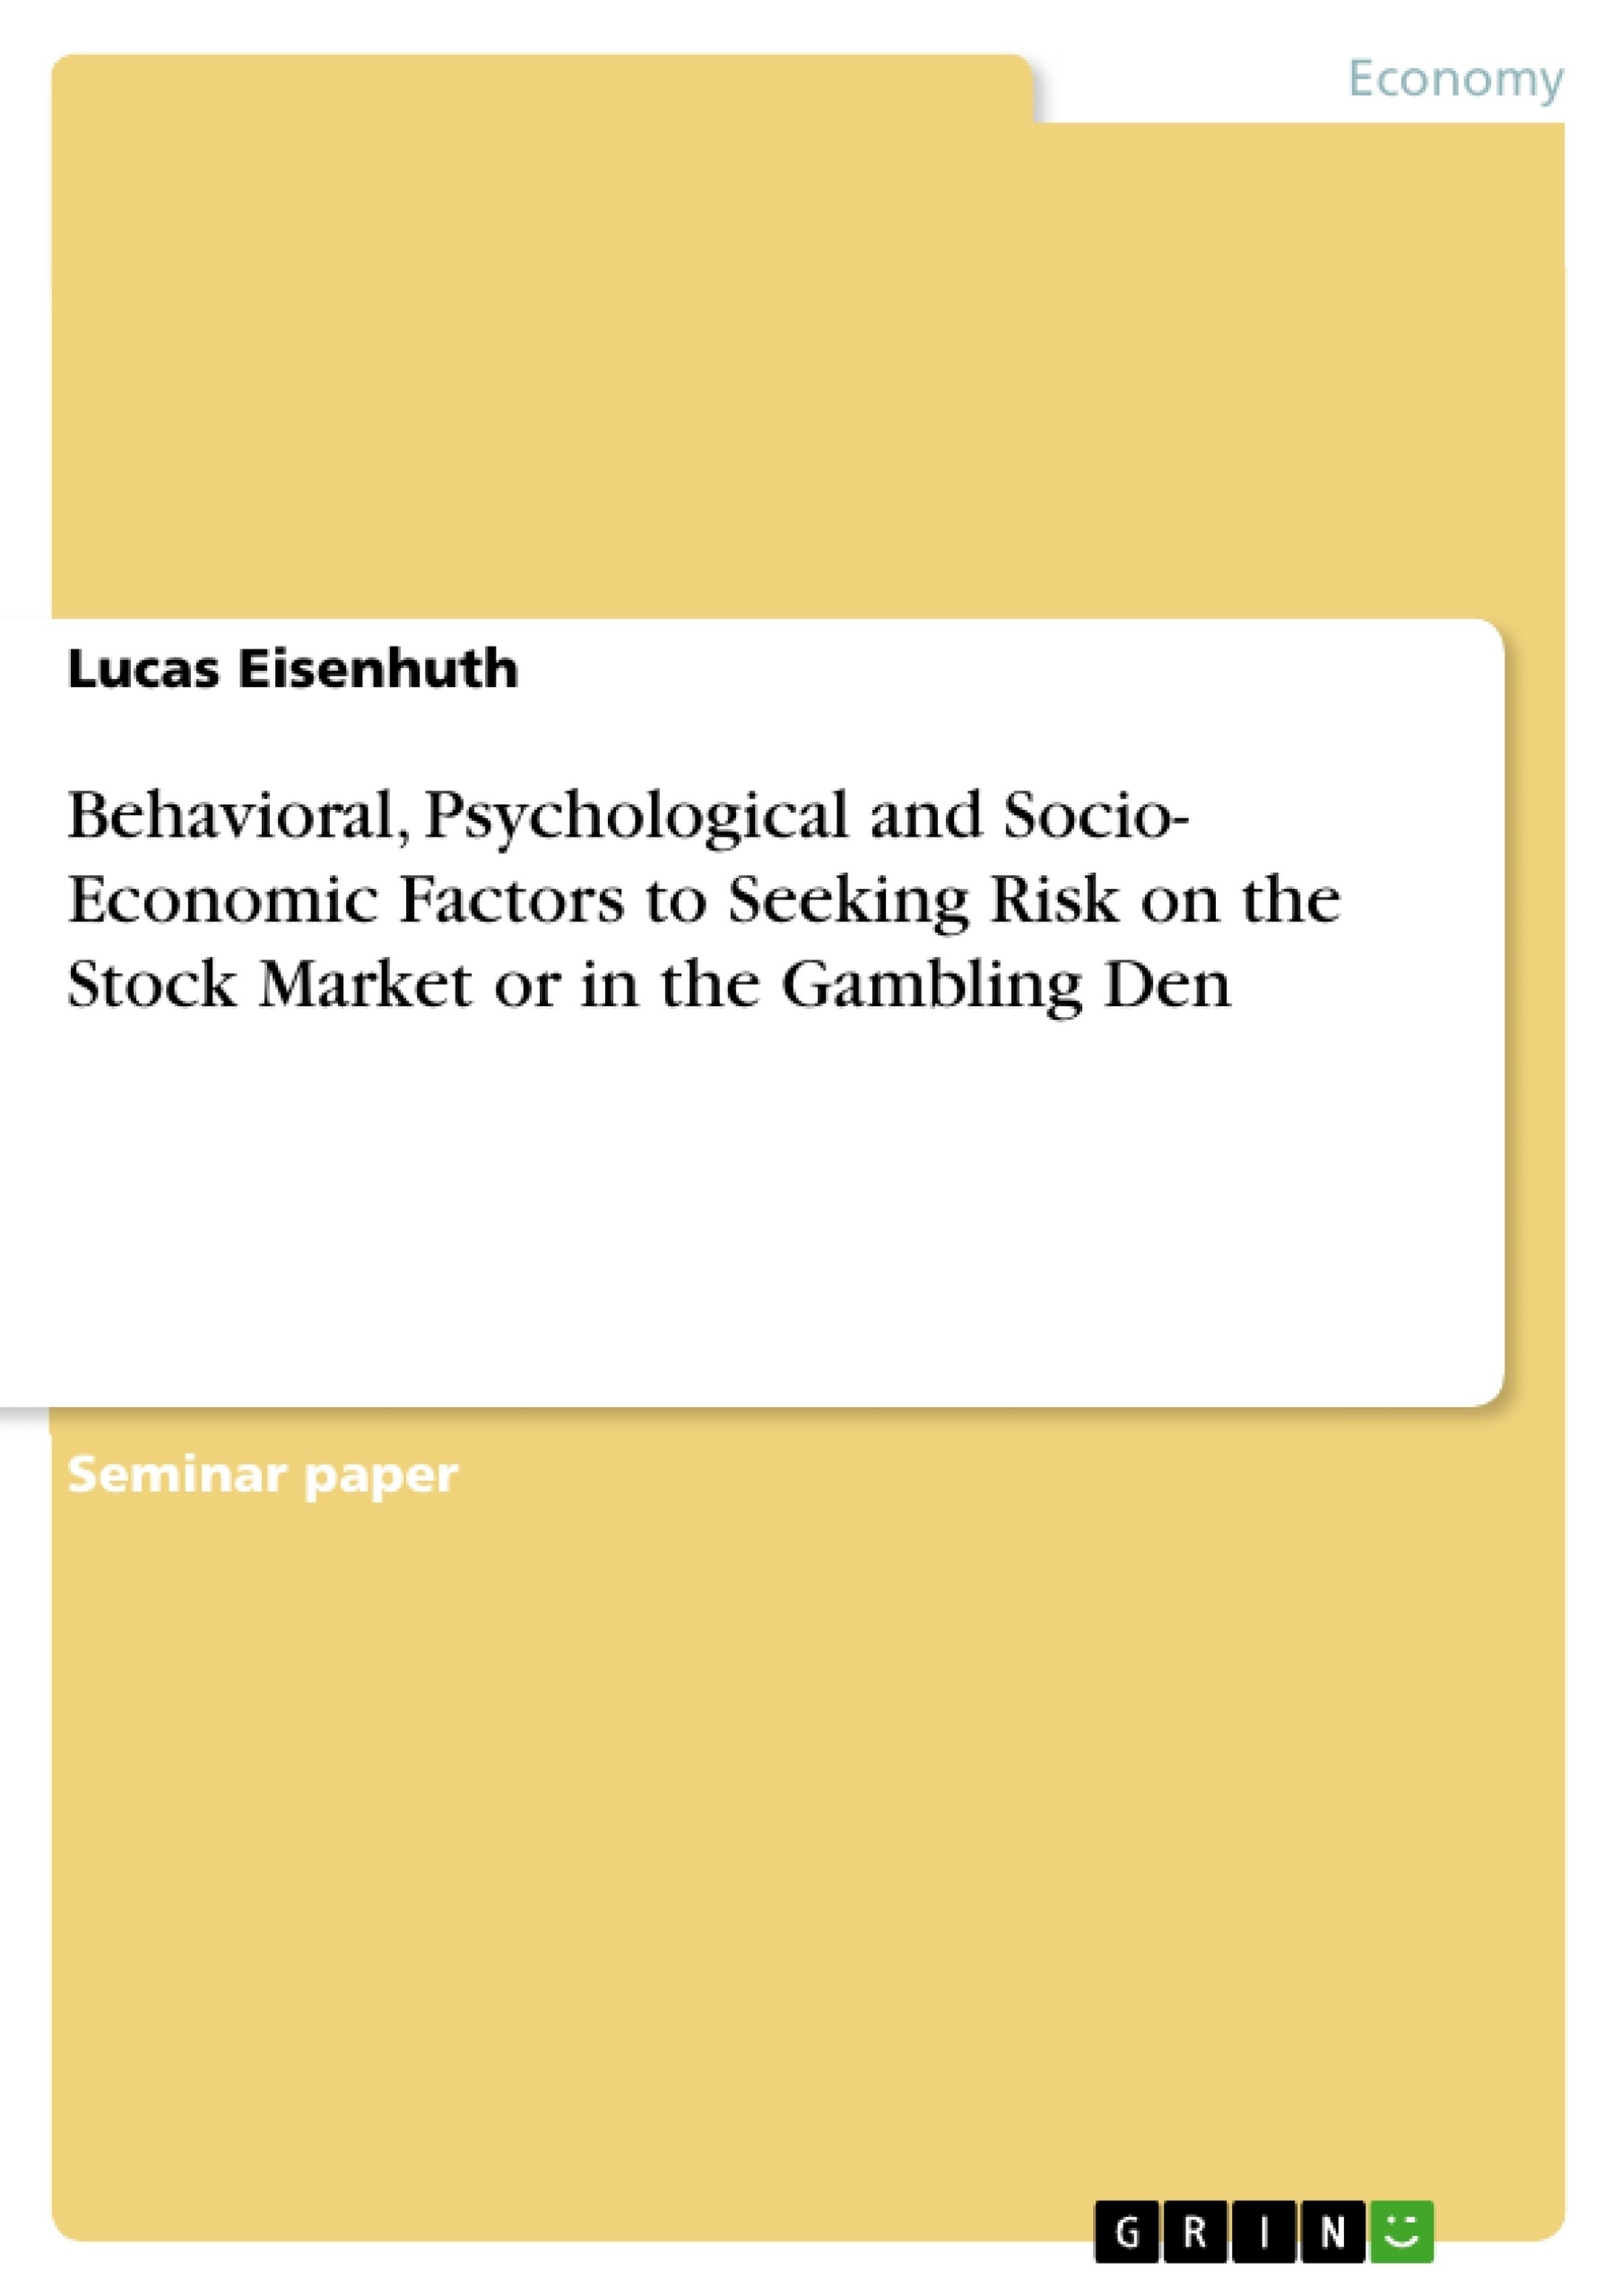 Title: Behavioral, Psychological and Socio- Economic Factors to Seeking Risk on the Stock Market or in the Gambling Den